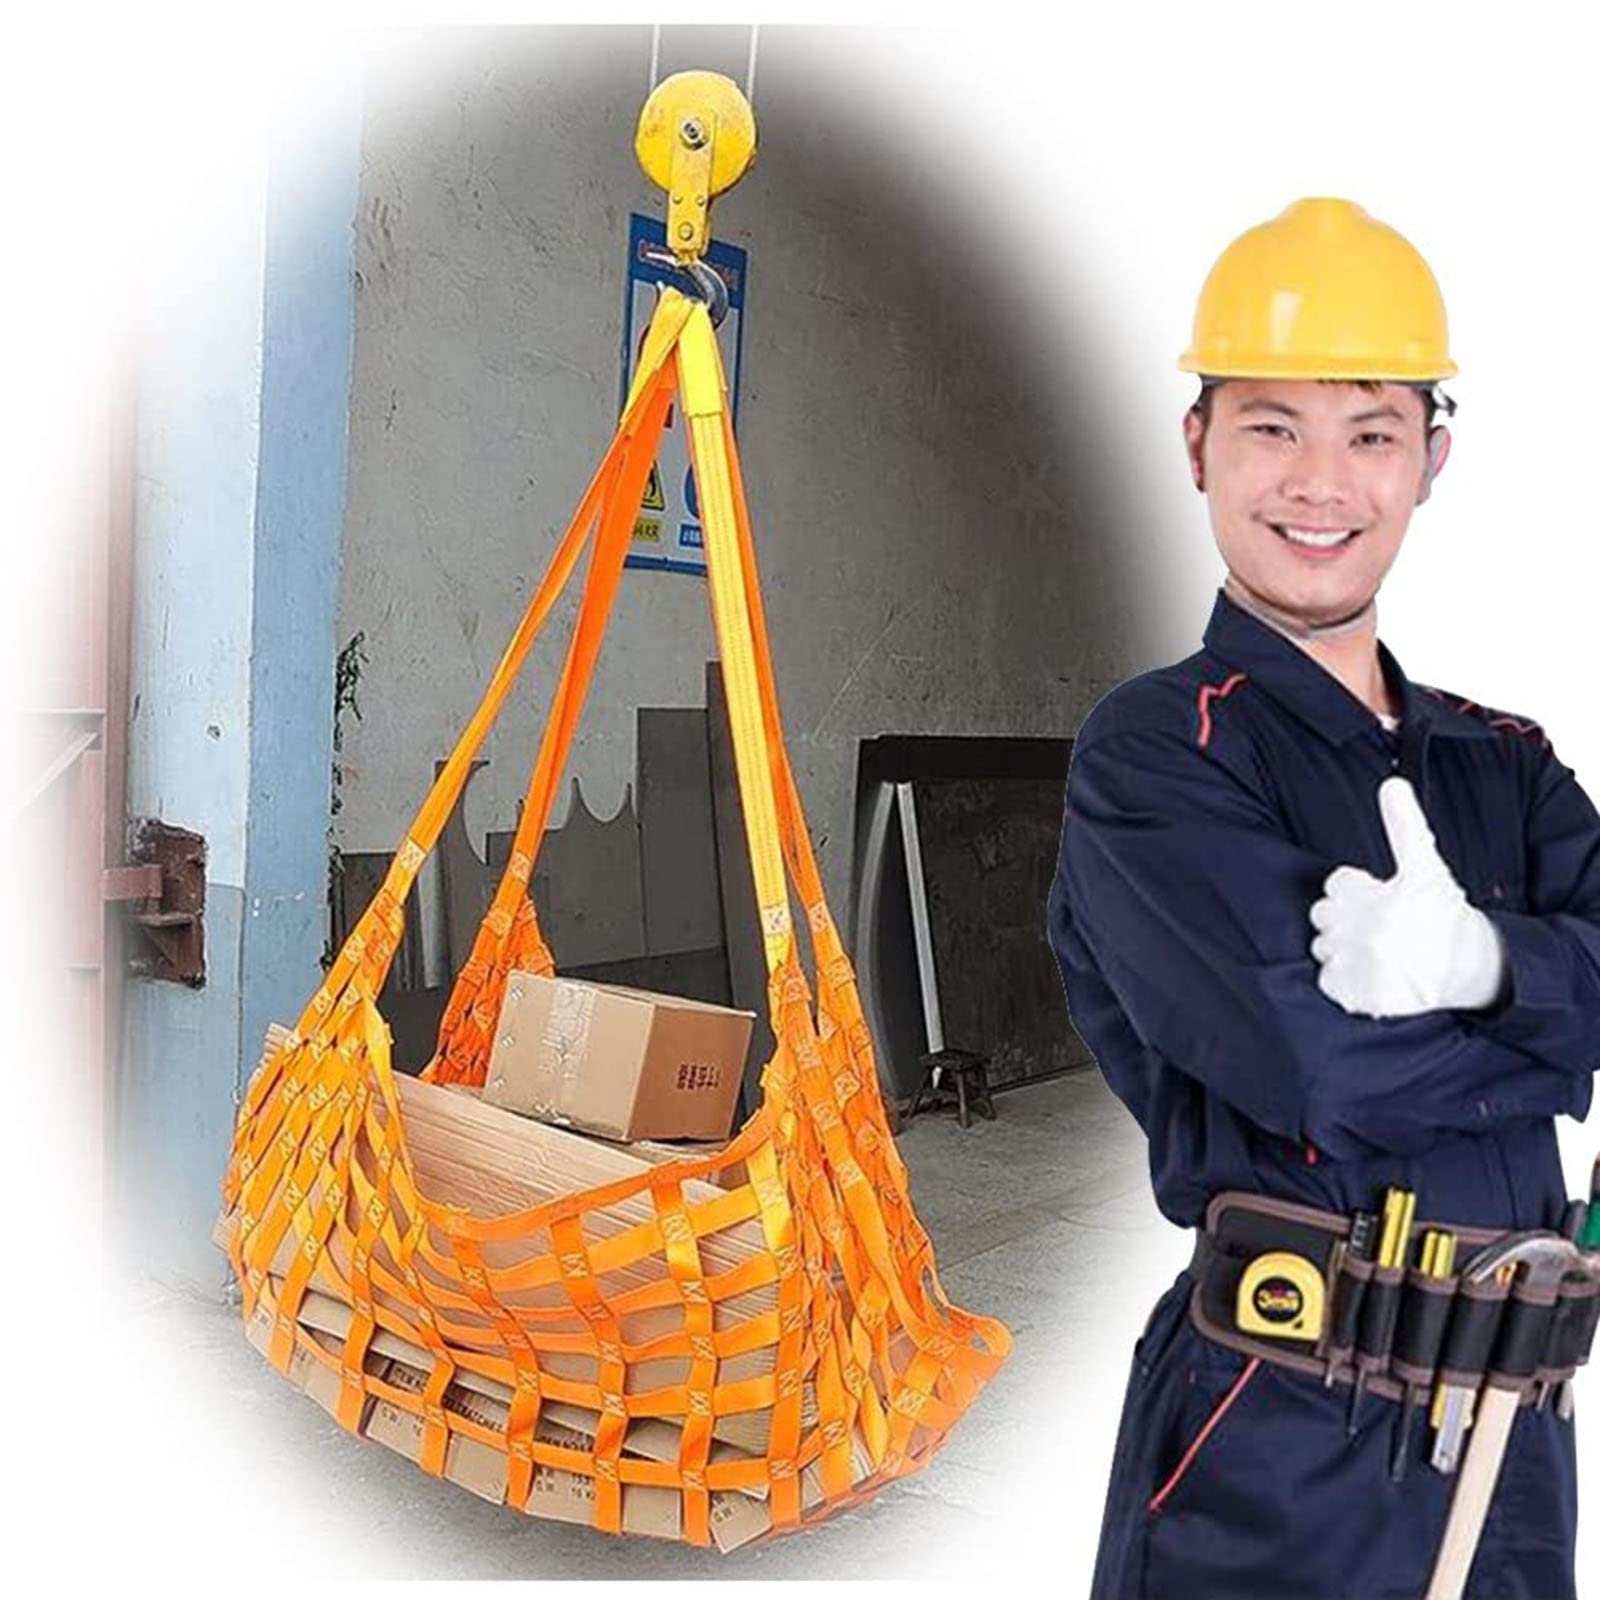 Cargo Sling Net - Cargo Lifting Bag Hanging Net Cargo Lifting Net Straps, Loading and Unloadng Heavy Objects, Dock Security Tear Resistance Strong Load Bearing Bag Netze (Onecolor 4 X 4M/M von WYRMB